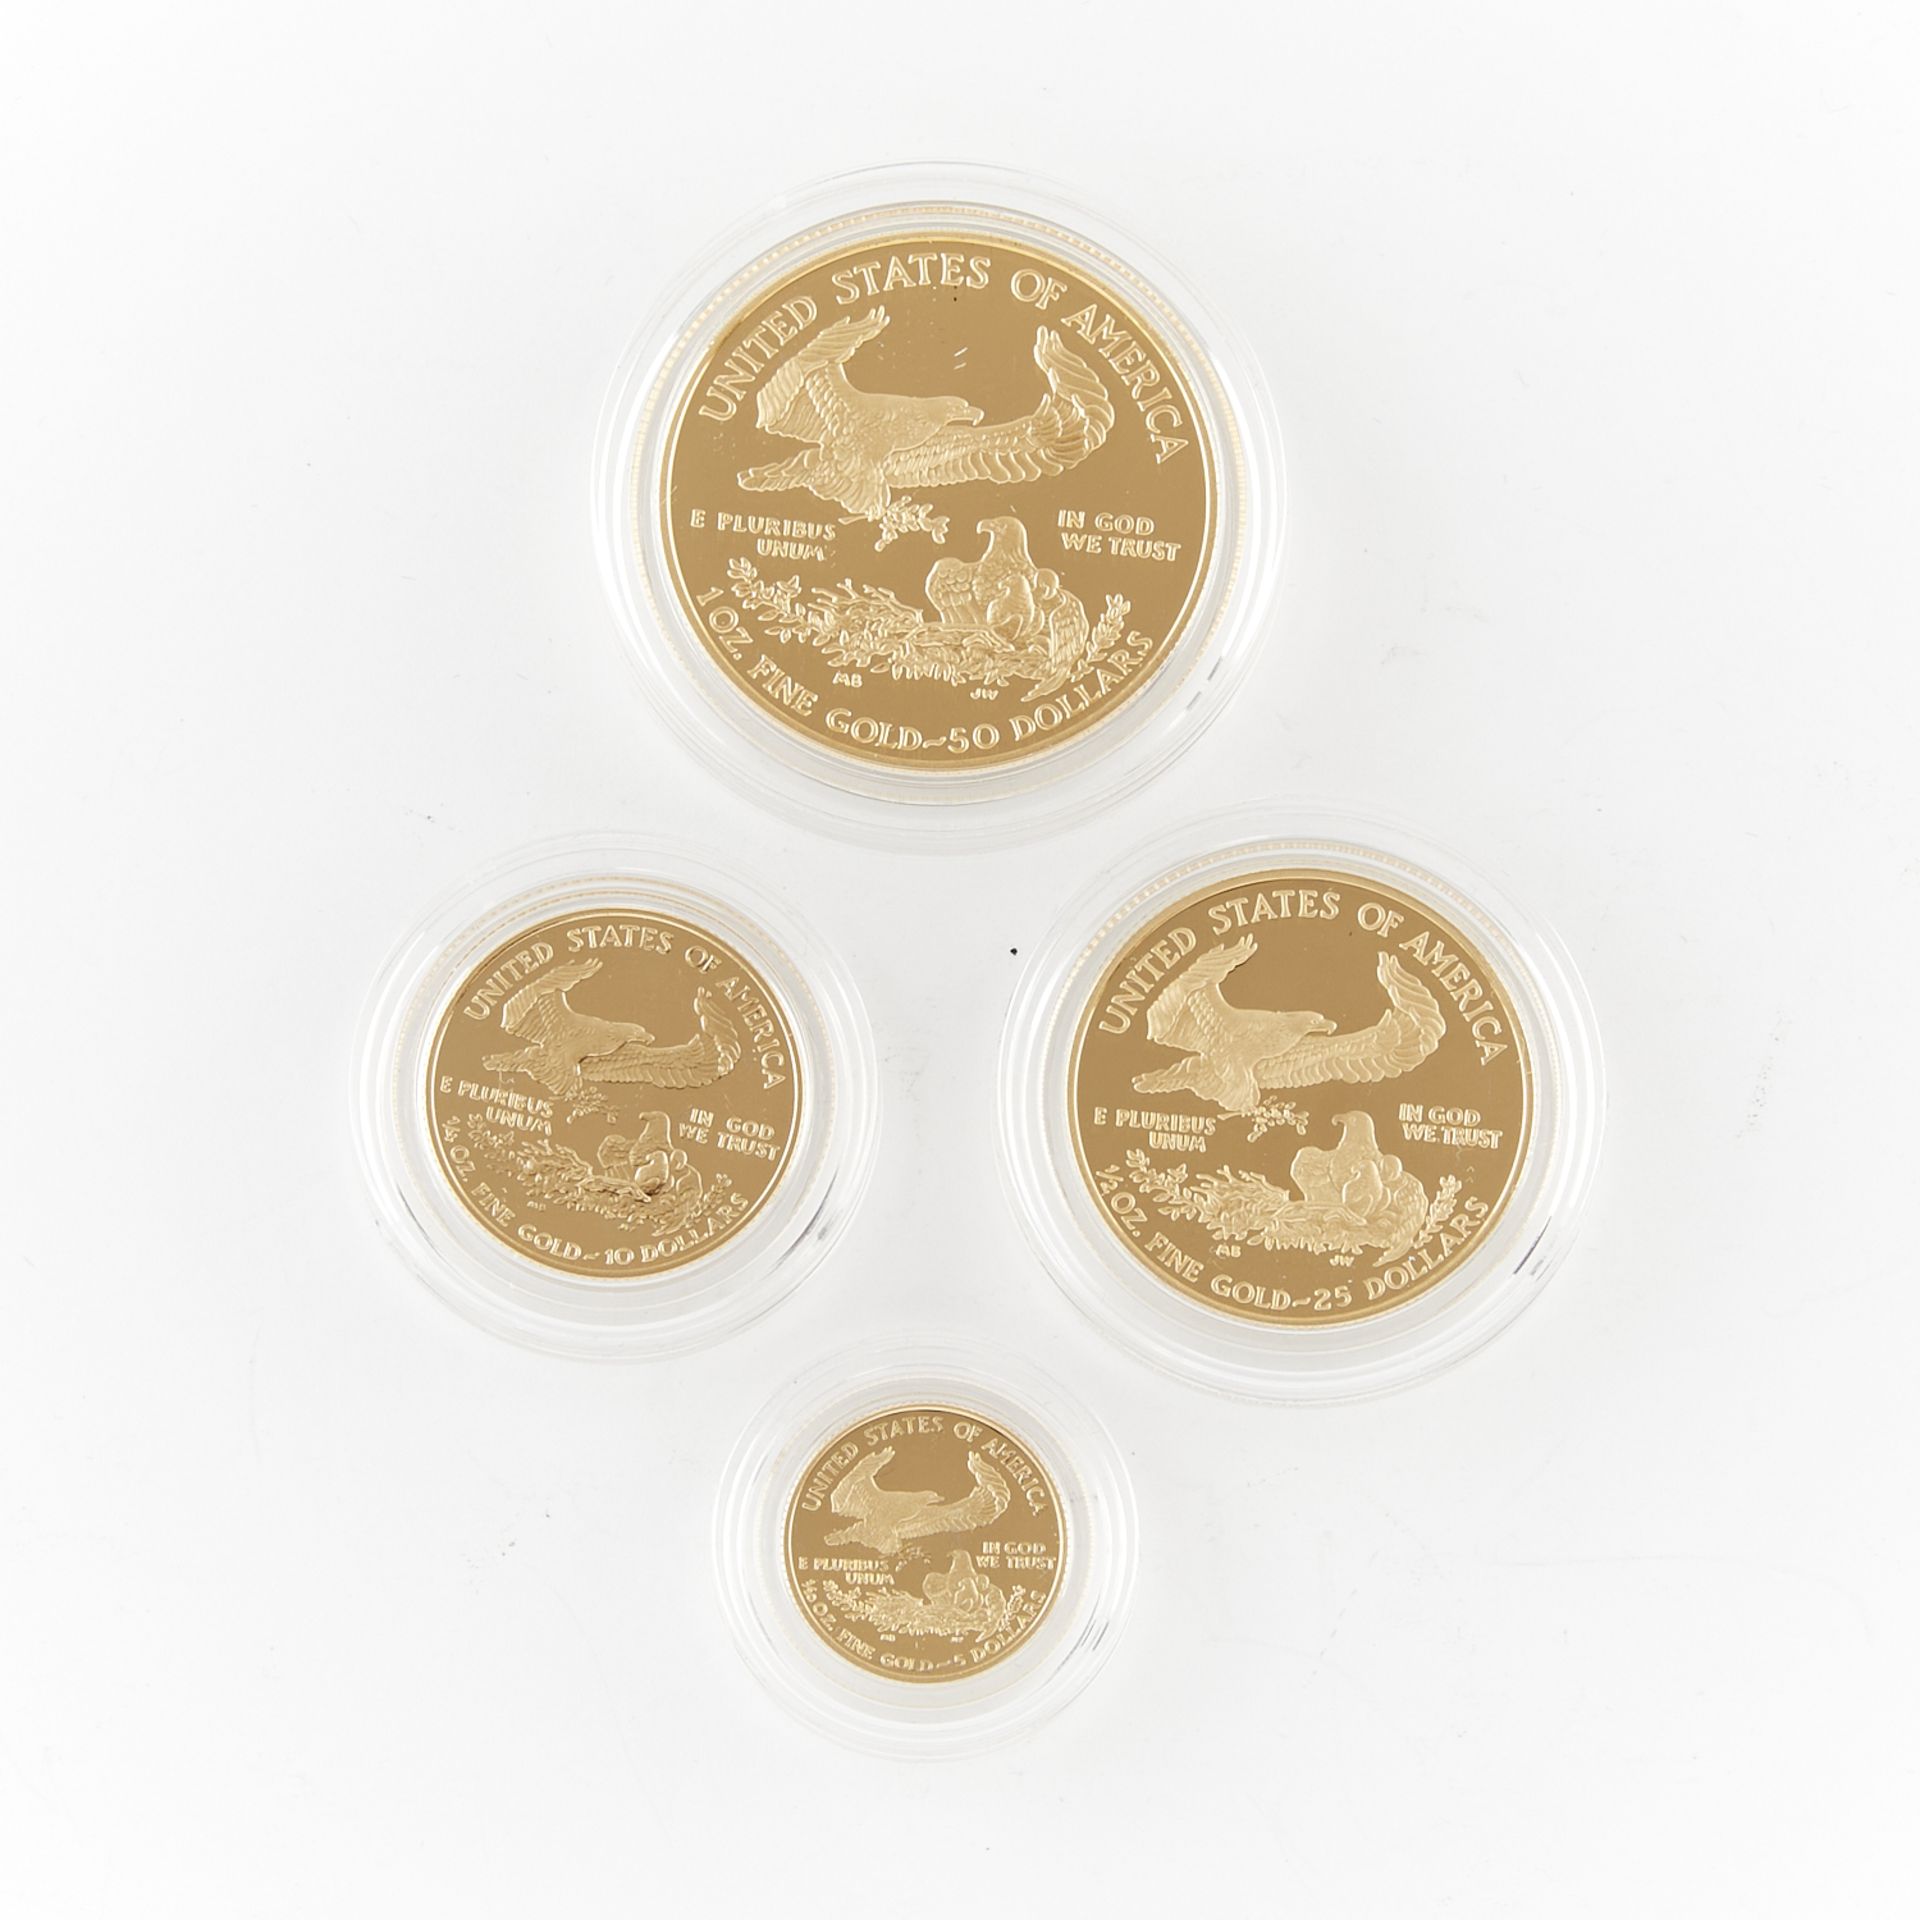 2008 Gold Proof American Eagle 4 Coin Set - Image 2 of 3